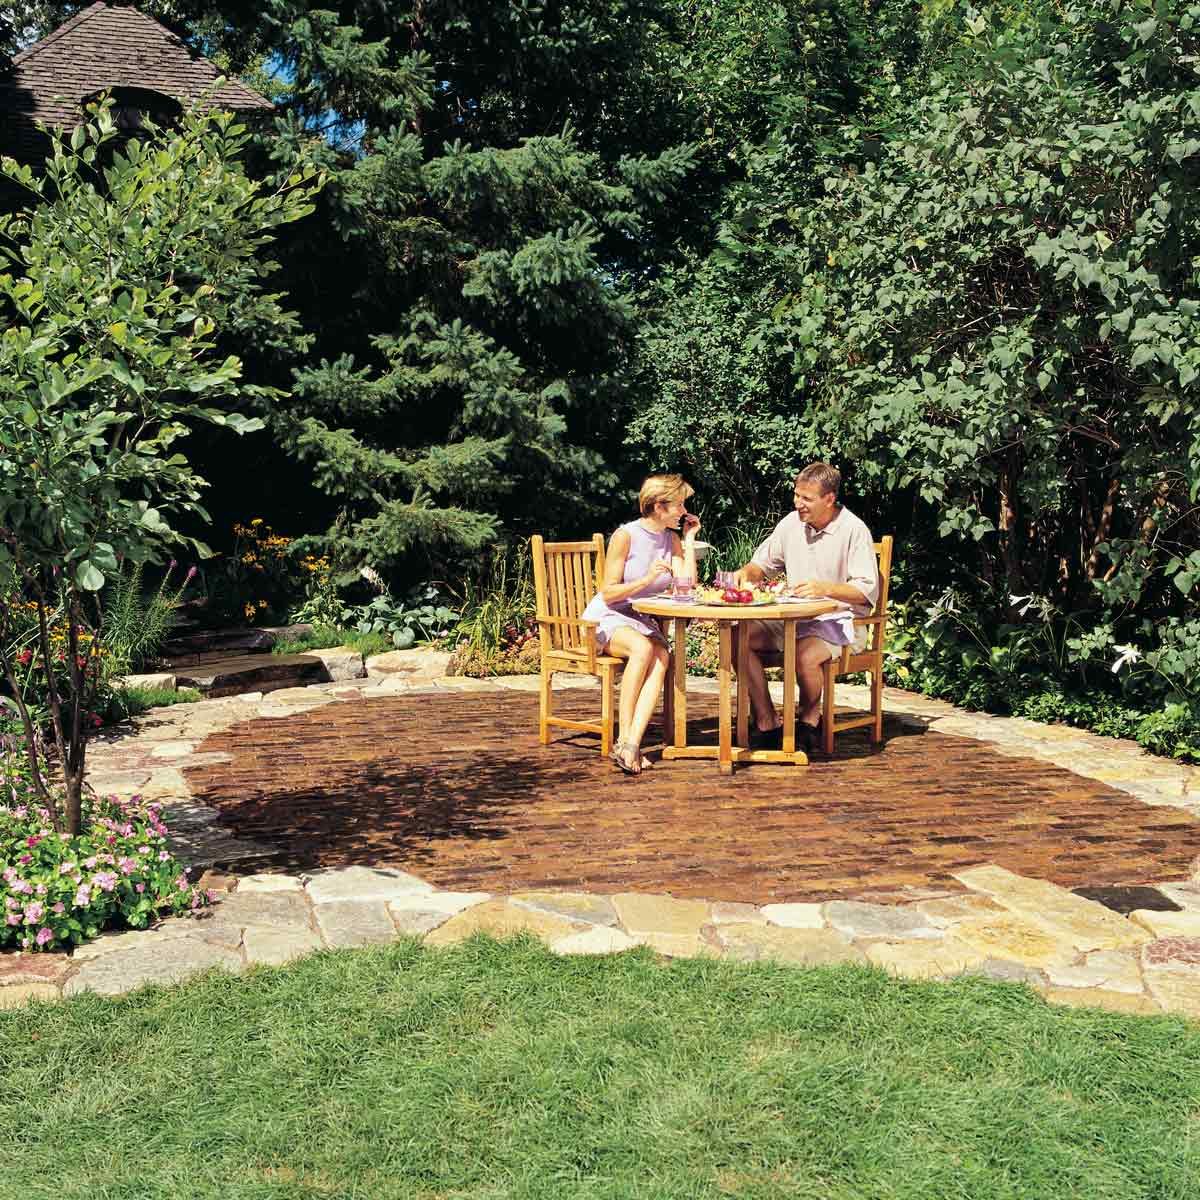 How To Build A Stone And Brick Patio Diy The Family Handyman